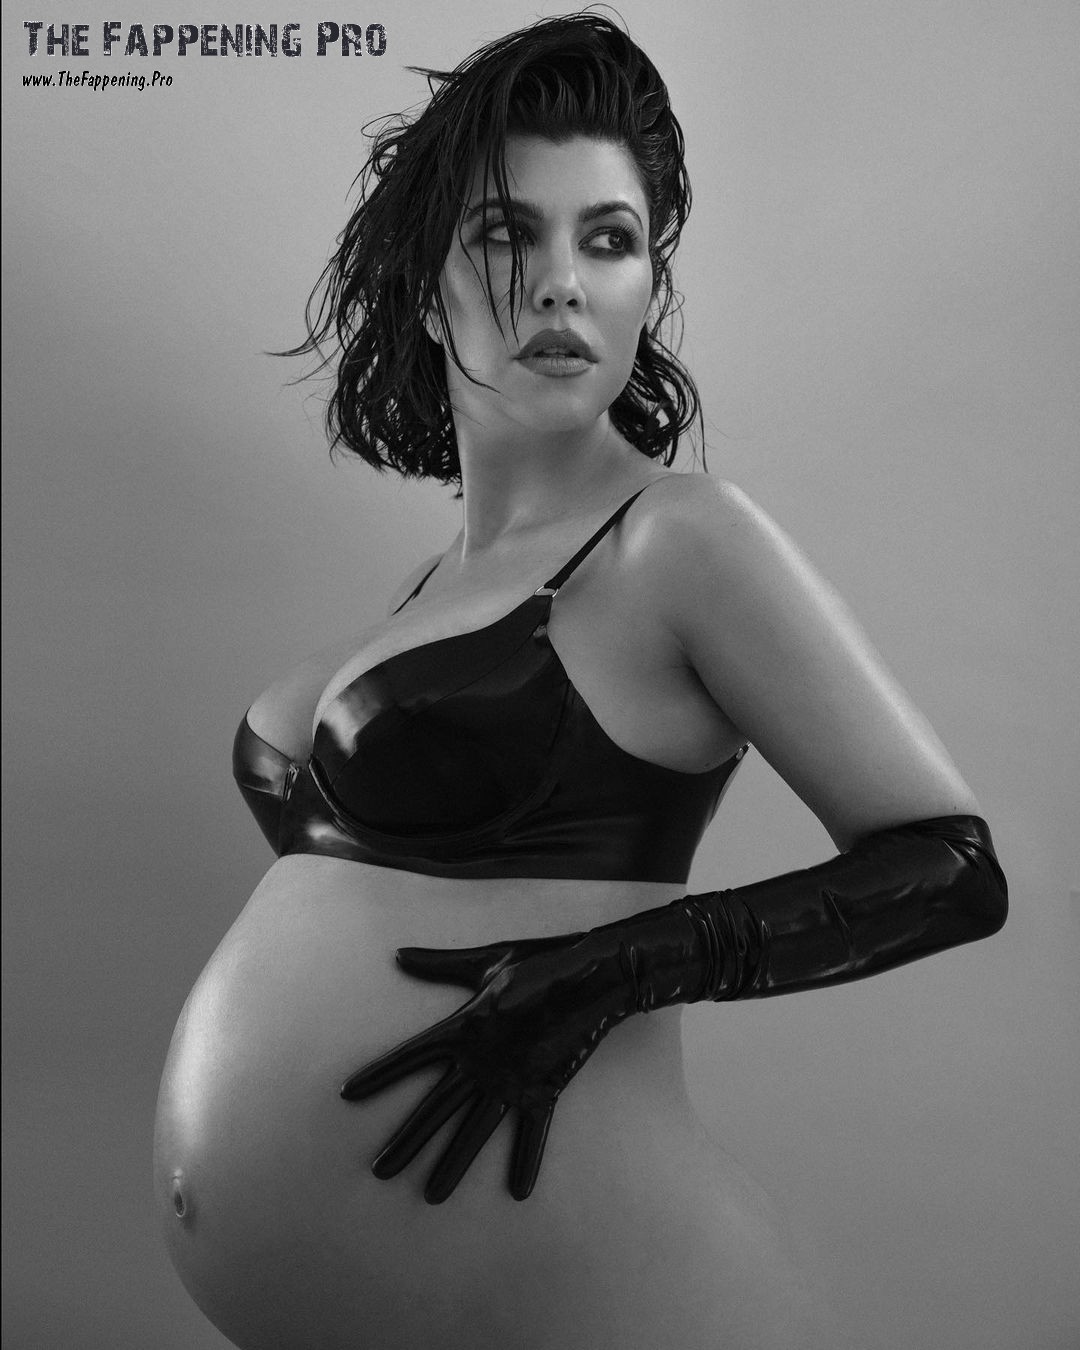 In a shocking turn of events, pregnant Kourtney Kardashian bared it all for a photoshoot with Vanity Fair Italy. The reality star posed without panties, rocked mesh tights, and even went topless, covering her breasts with her hands. The scandalous BTS footage is set to be released soon, leaving fans buzzing with anticipation. Follow Kourtney's daring maternity journey on her social media platforms.